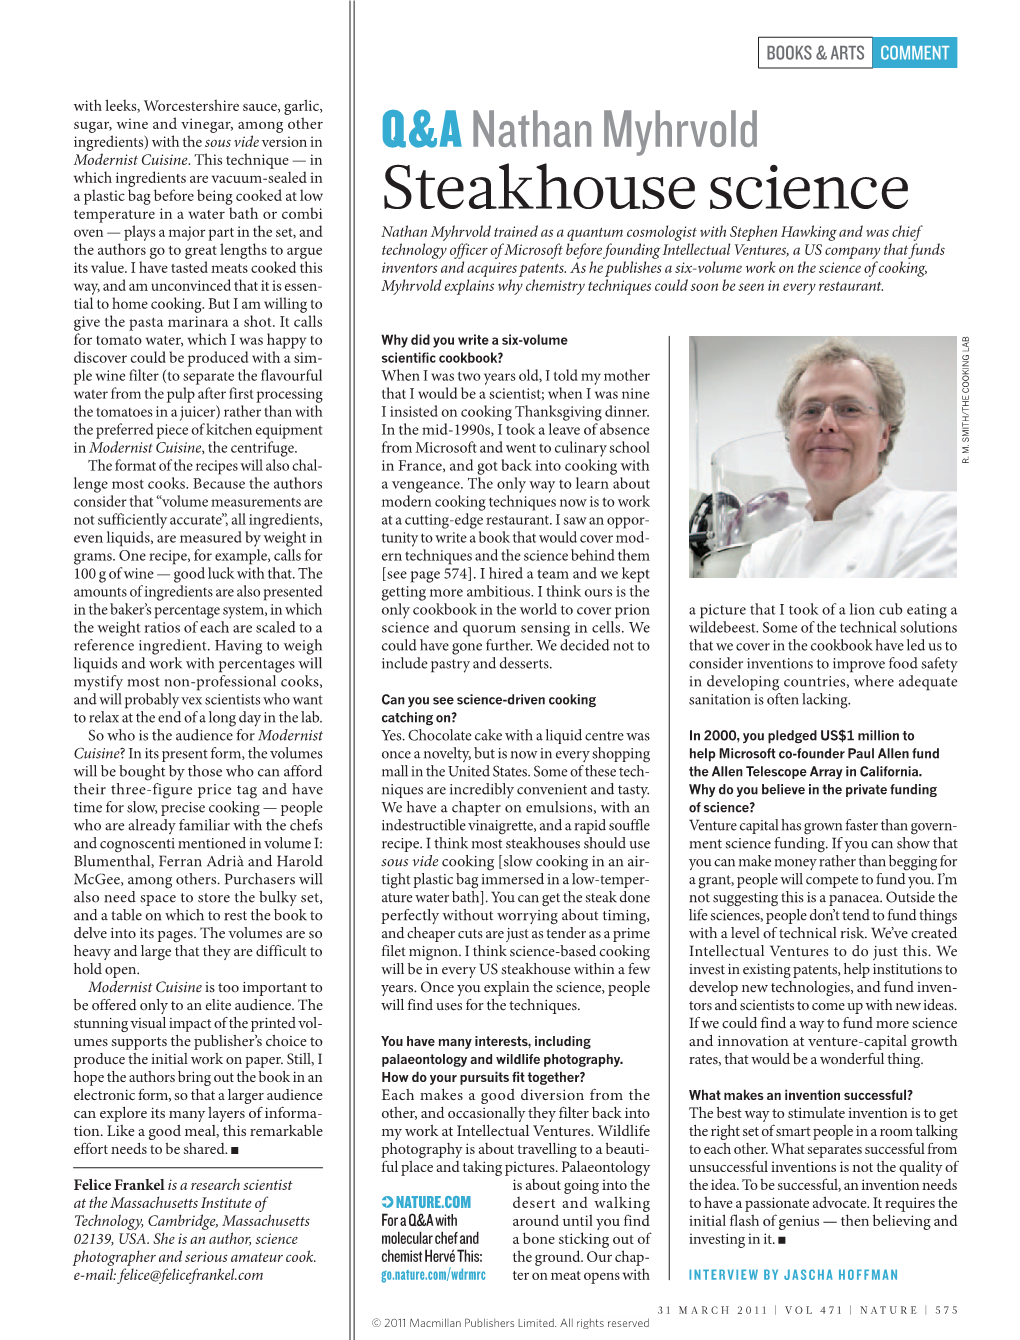 Steakhouse Science